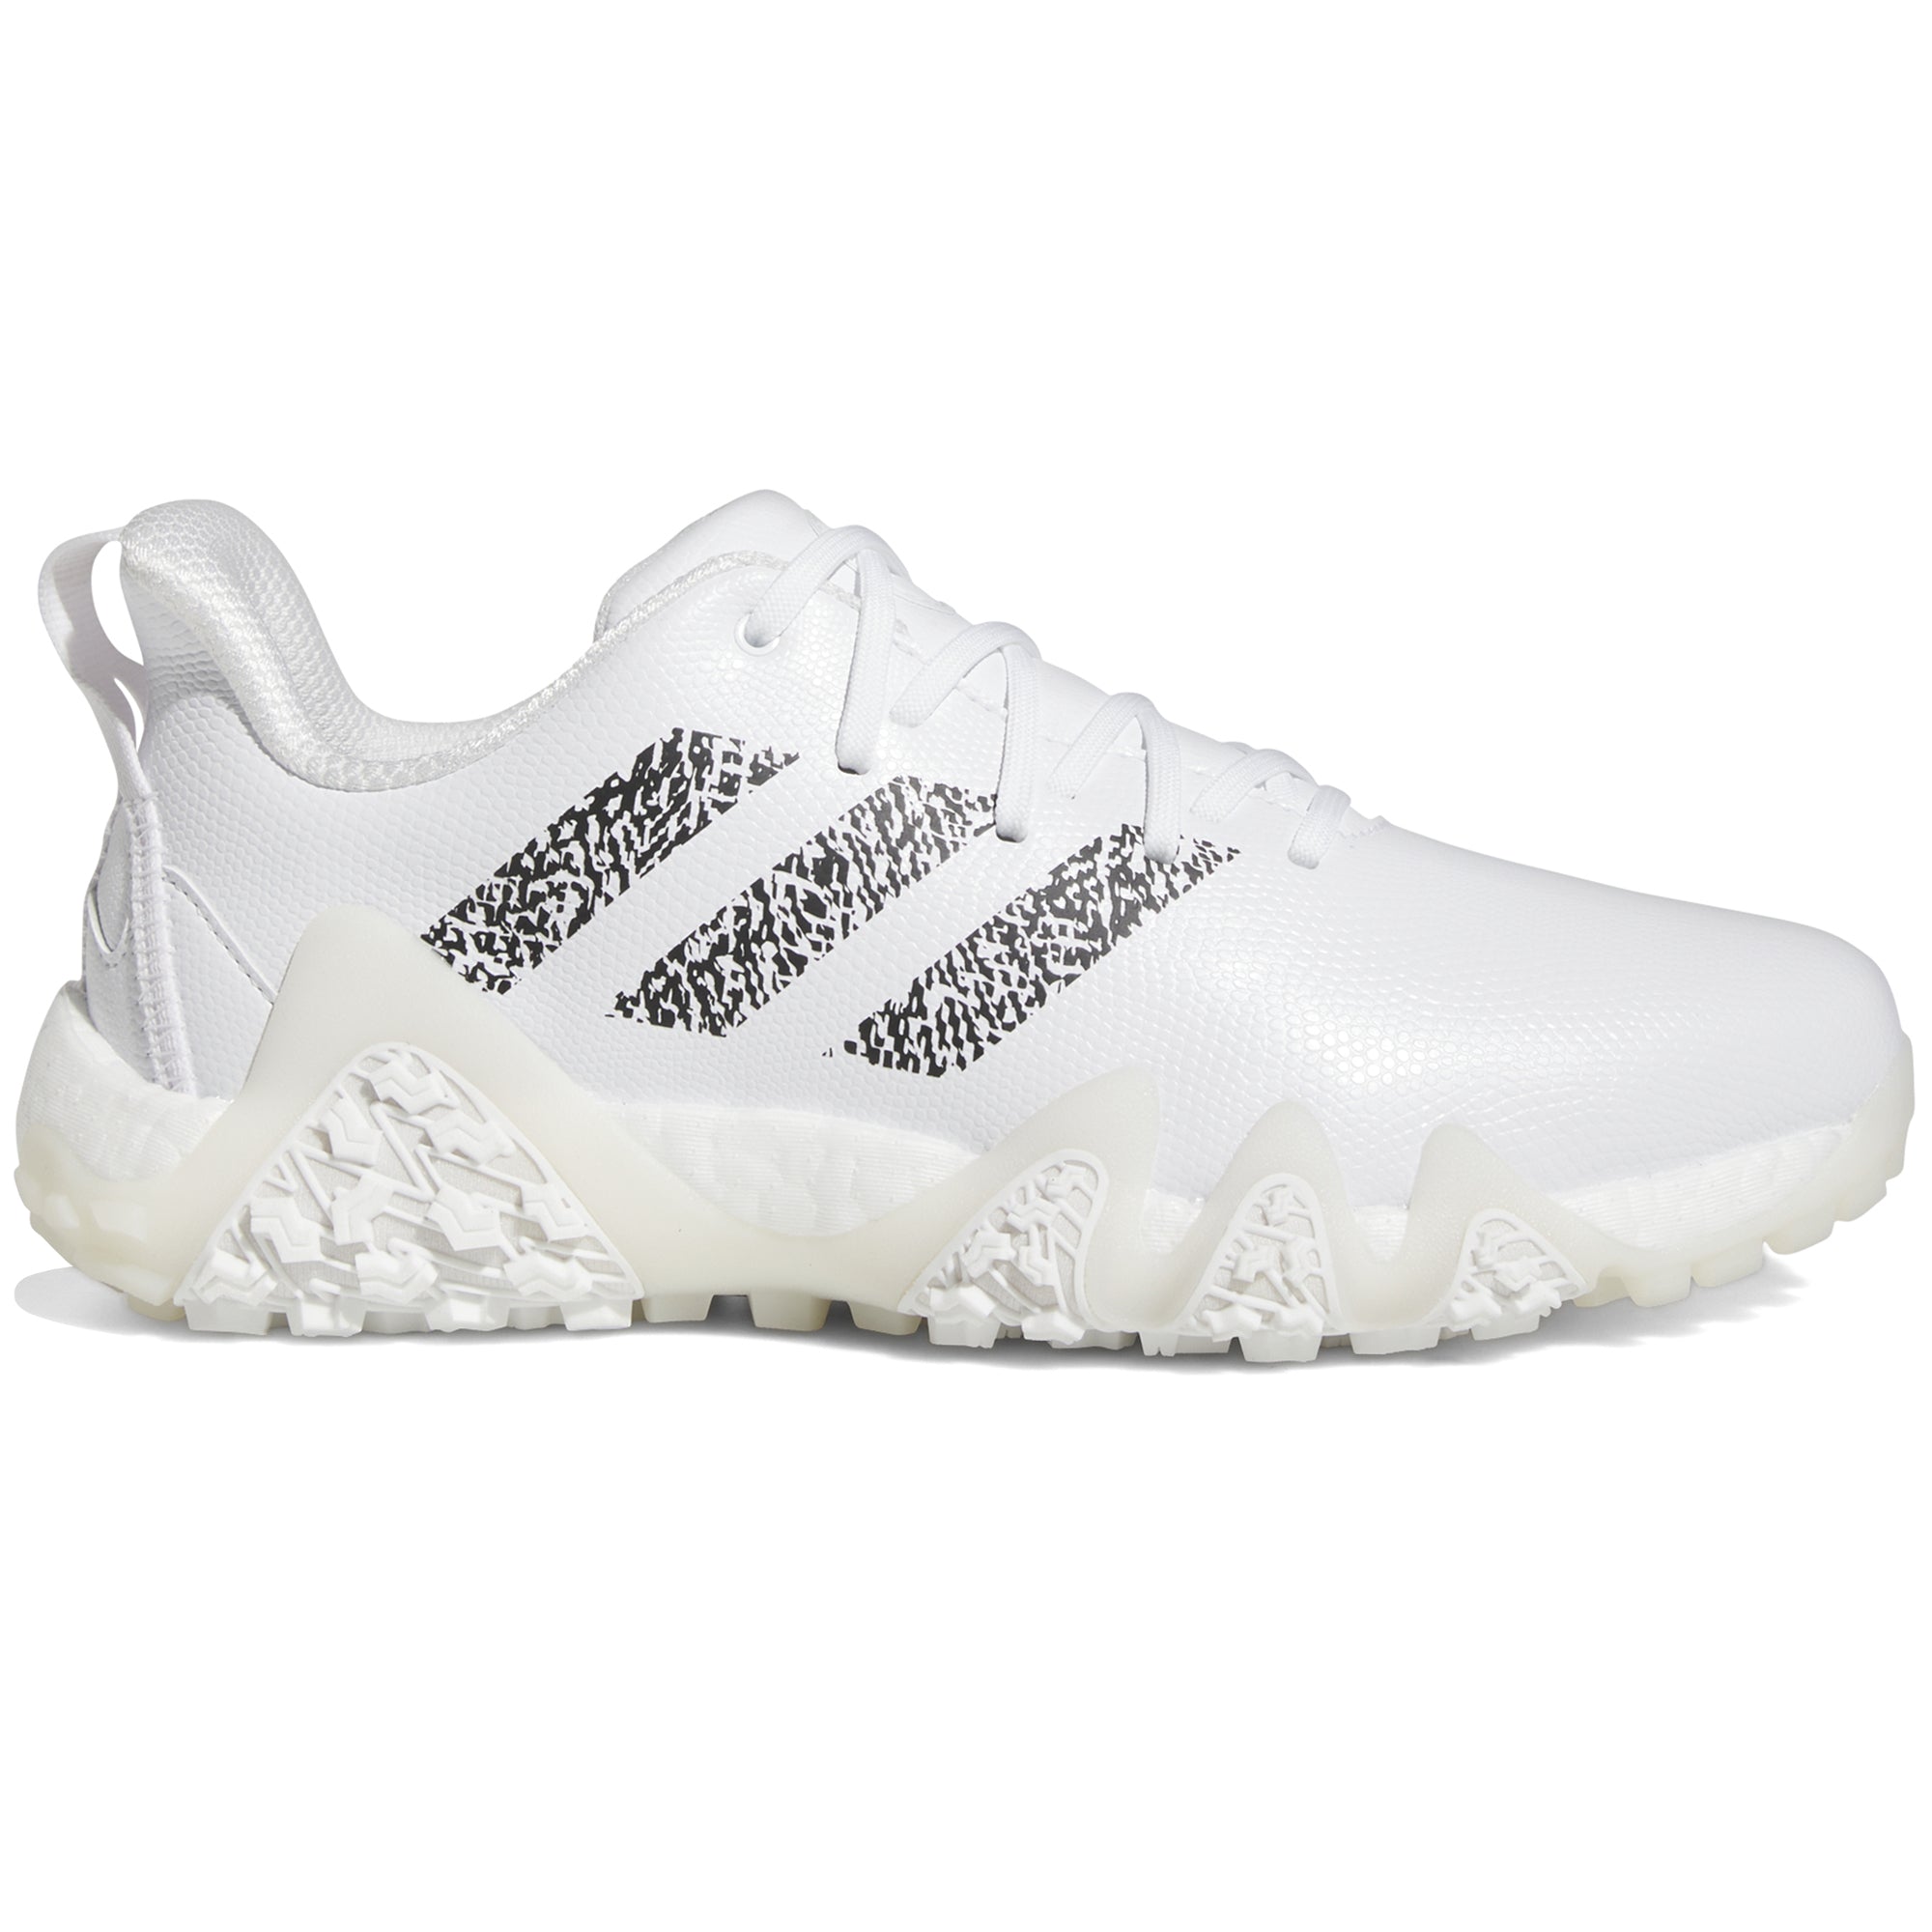 adidas CODECHAOS 22 Golf Shoes White Core Black Crystal White | Function18